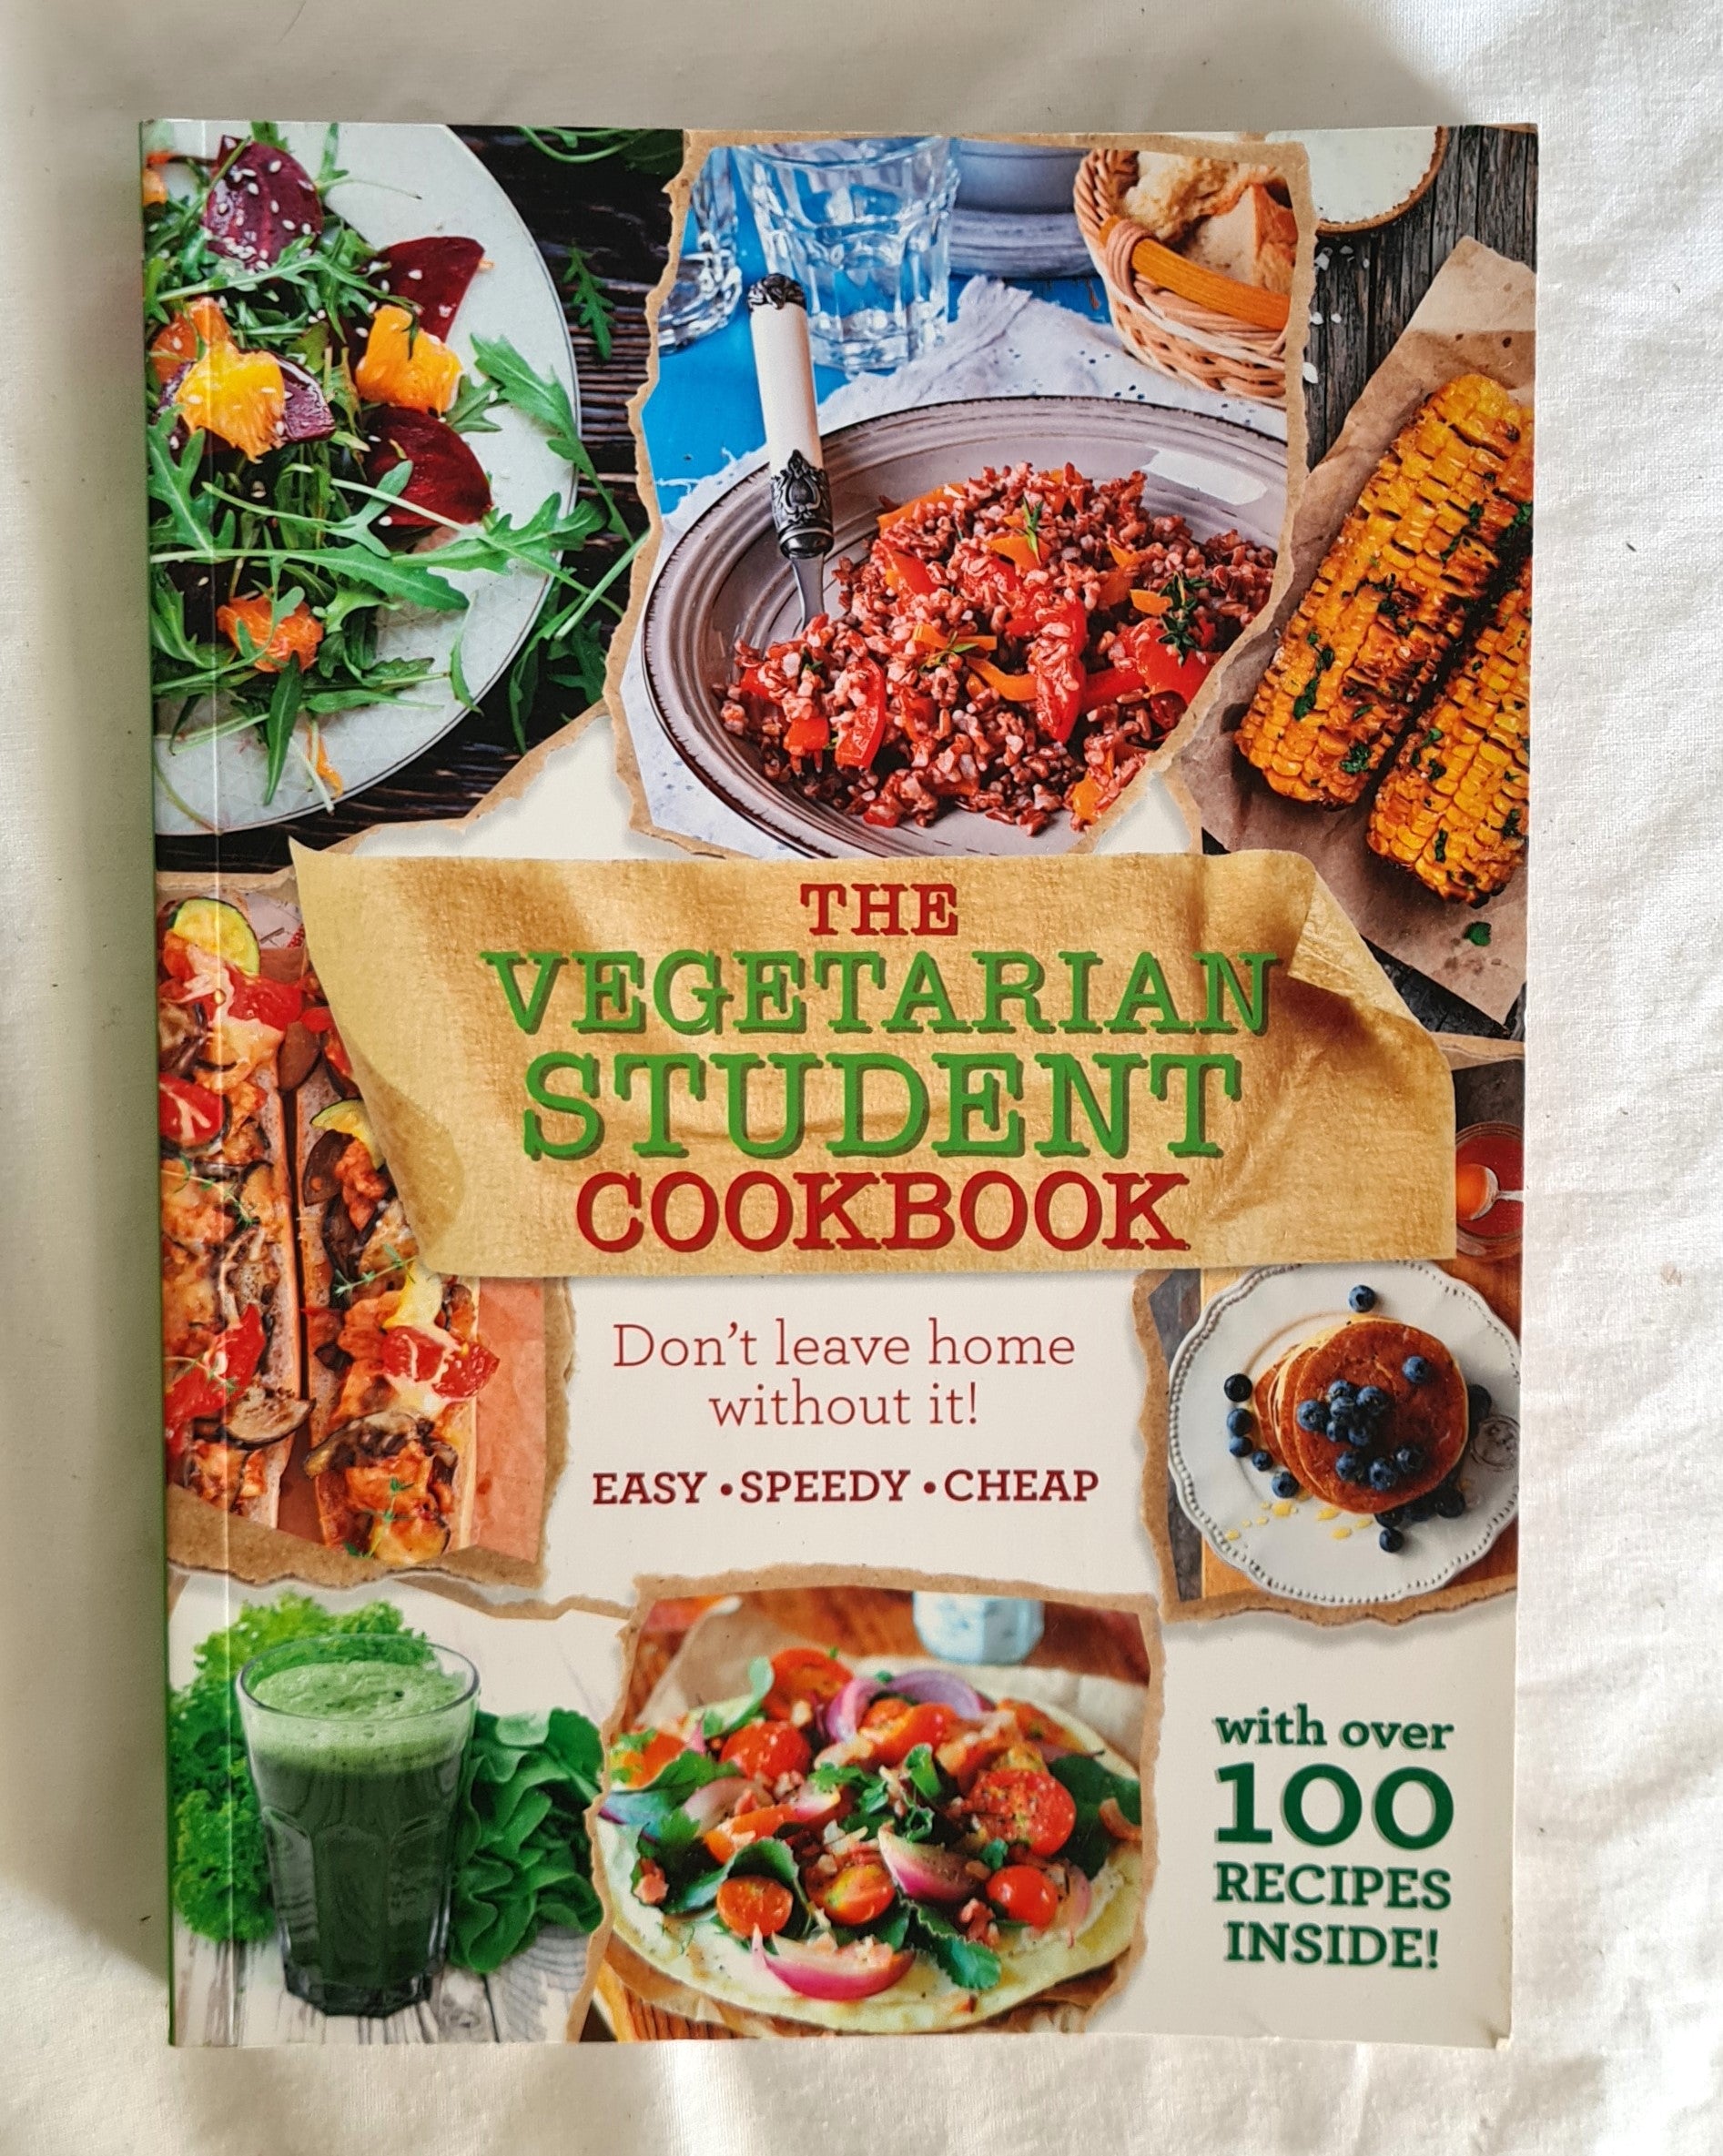 The Vegetarian Student Cookbook  by Phoebe Morgan (Editor)